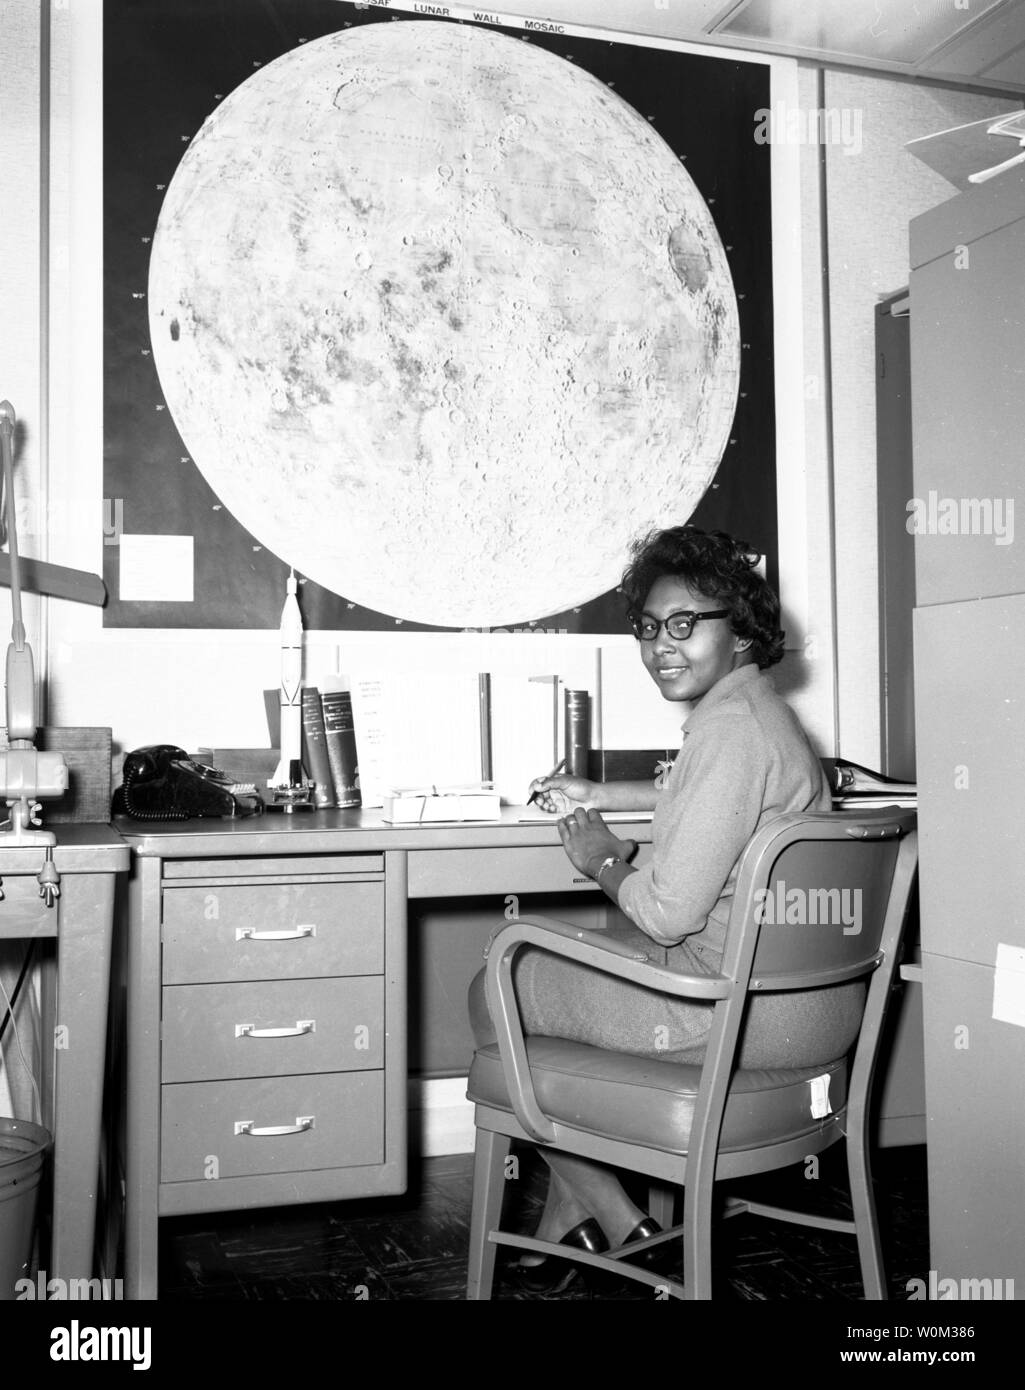 Jeanette Scissum, seen here in this undated photograph, joined NASA's Marshall Space Flight Center in 1964 after earning her bachelor's and master's degrees in mathematics from Alabama A&M University. Scissum published a NASA report in 1967, 'Survey of Solar Cycle Prediction Models,' which put forward techniques for improved forecasting of the sunspot cycle. In 1975, Scissum wrote an article for the National Technical Association, 'Equal Employment Opportunity and the Supervisor - A Counselor's View,' which argued that many discrimination complaints could be avoided 'through adequate and meani Stock Photo